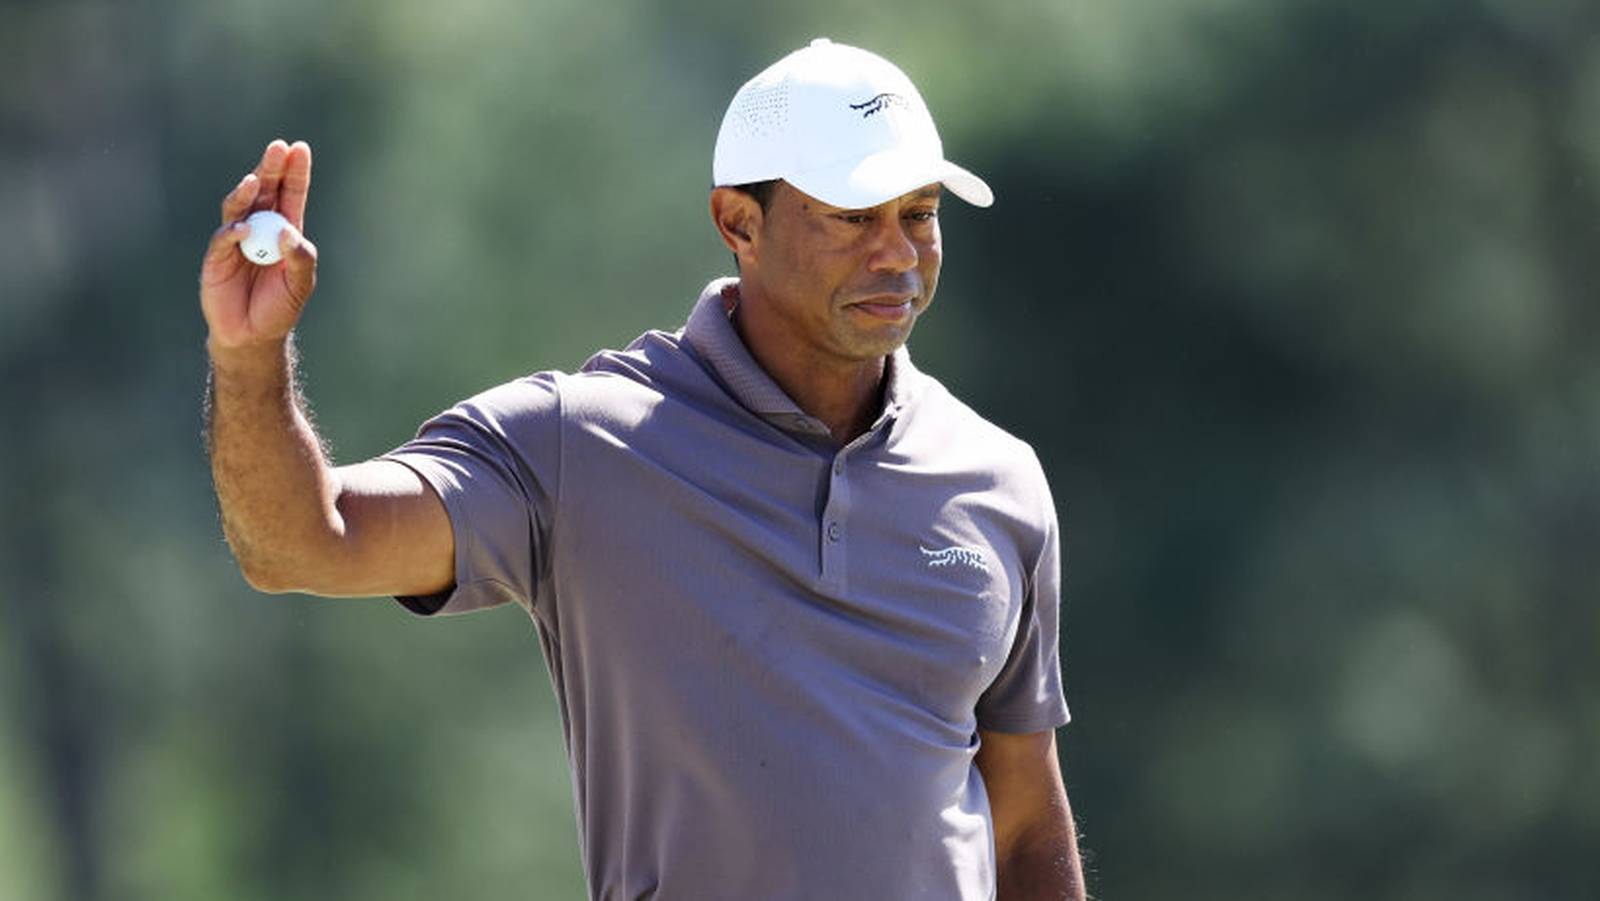 Tiger Woods makes the cut for the Masters for 24th time in a row 102.